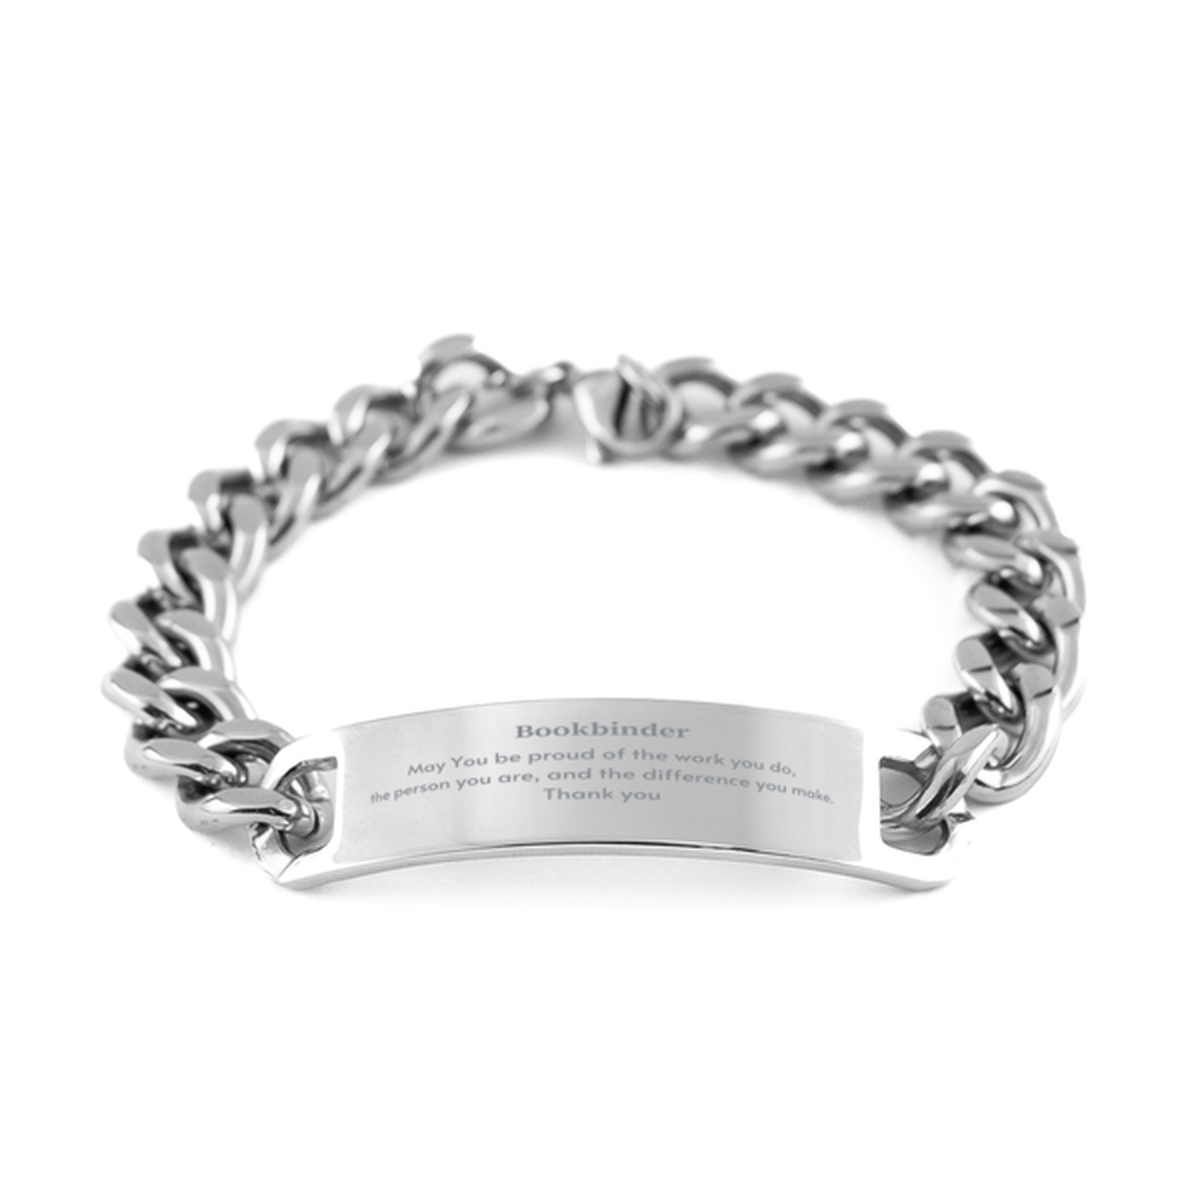 Heartwarming Cuban Chain Stainless Steel Bracelet Retirement Coworkers Gifts for Bookbinder, Bookbinder May You be proud of the work you do, the person you are Gifts for Boss Men Women Friends